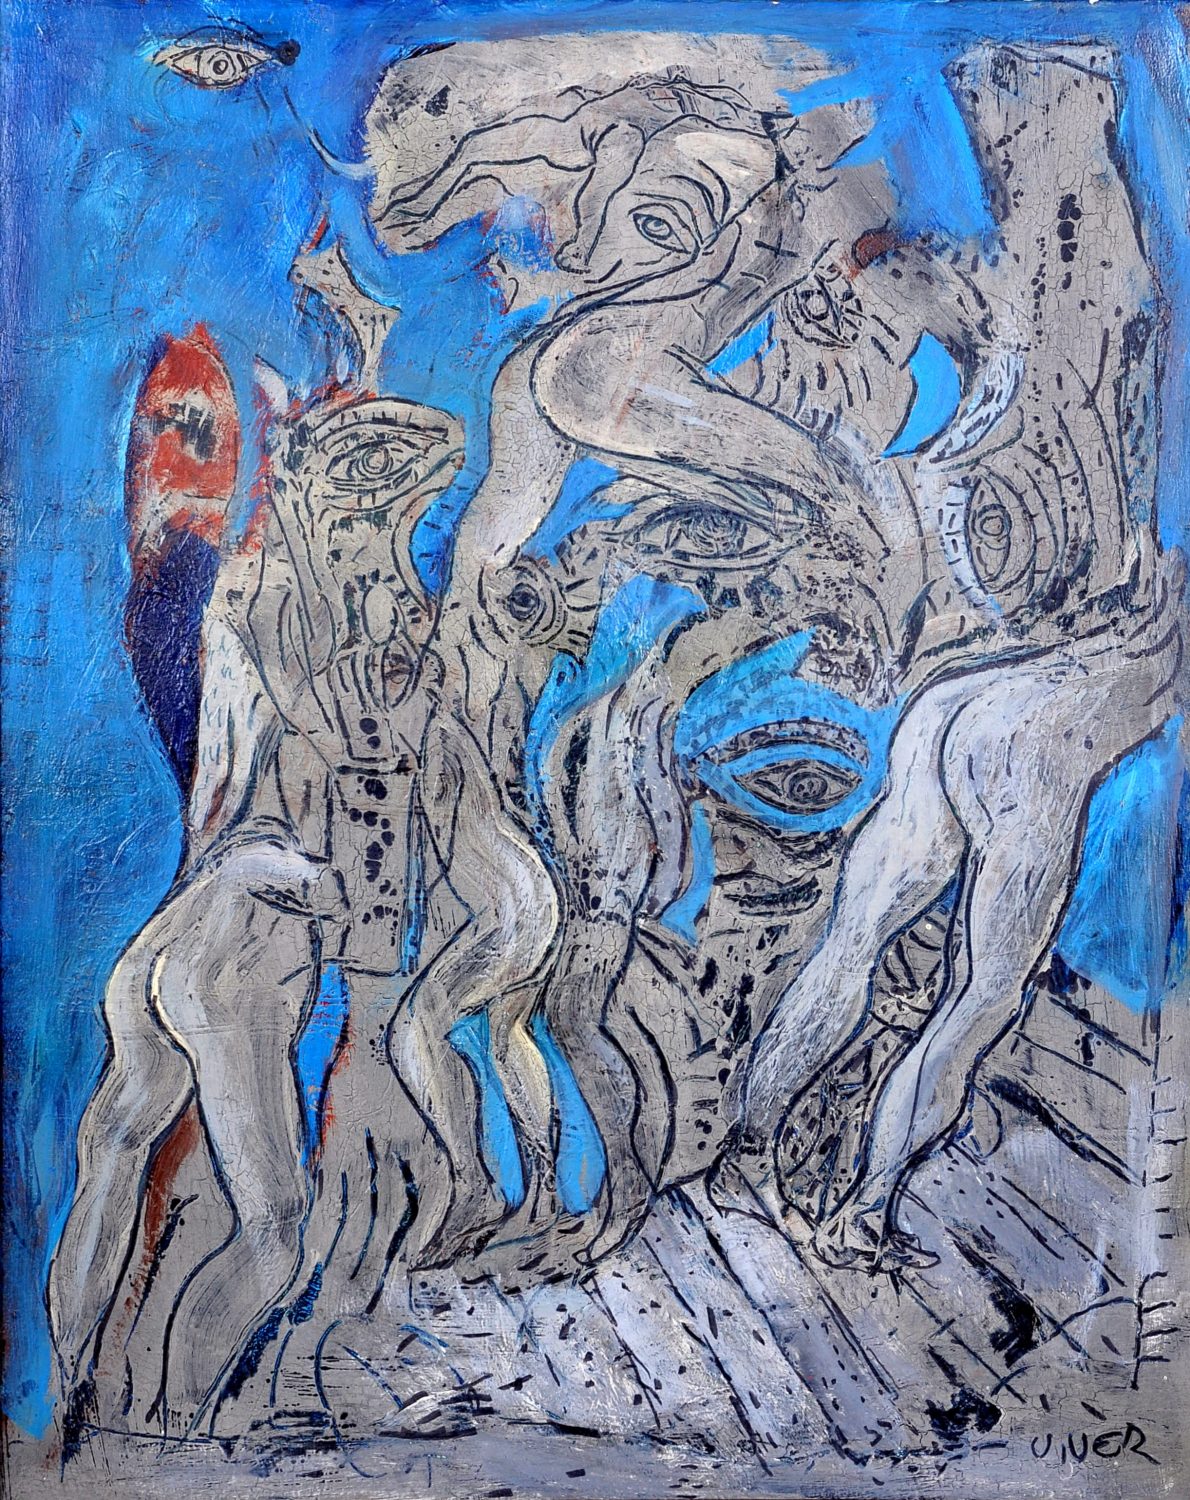 thumbnail of Visions of the Voyeurist by Ecuadorian artist Carlos Viver. medium: mixed media on canvas. Dimensions: 39 x 32 inches. date: 2000